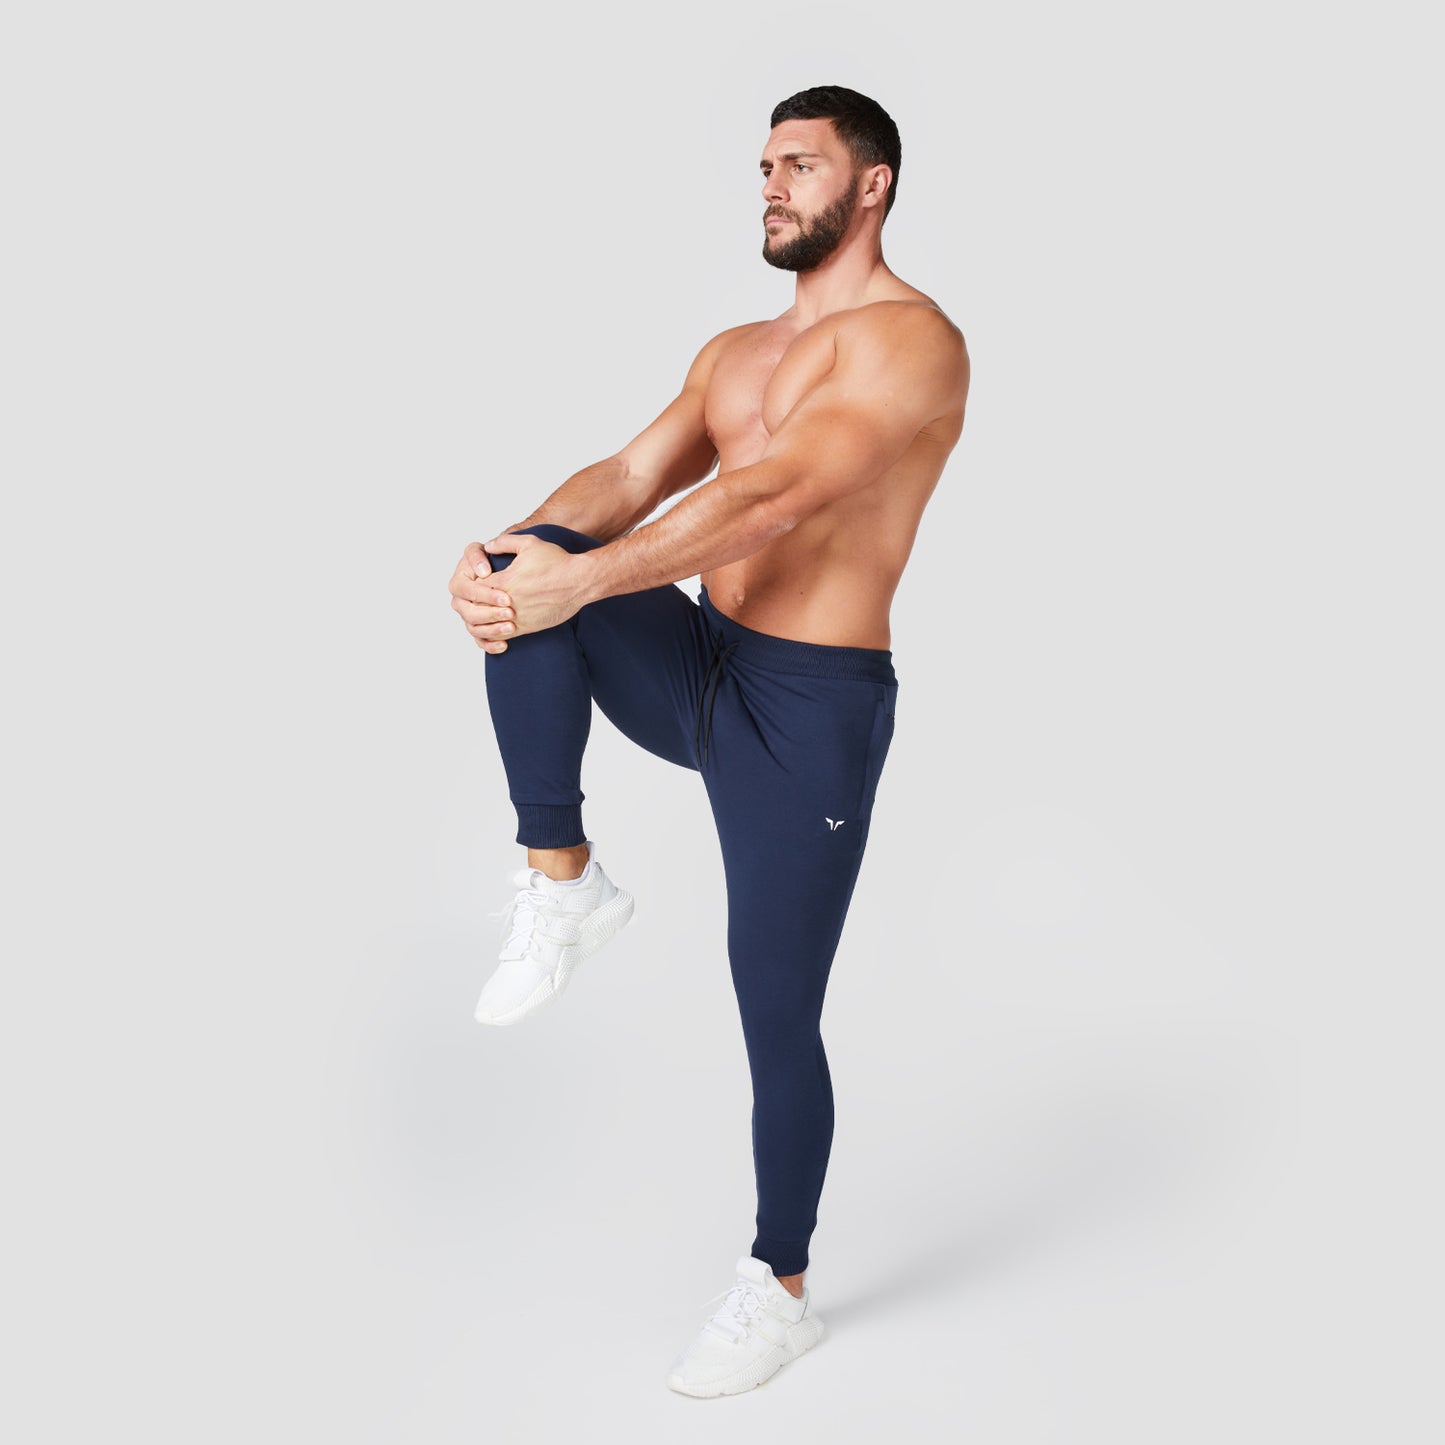 squatwolf-gym-wear-core-cuffed-joggers-navy-workout-pants-for-men